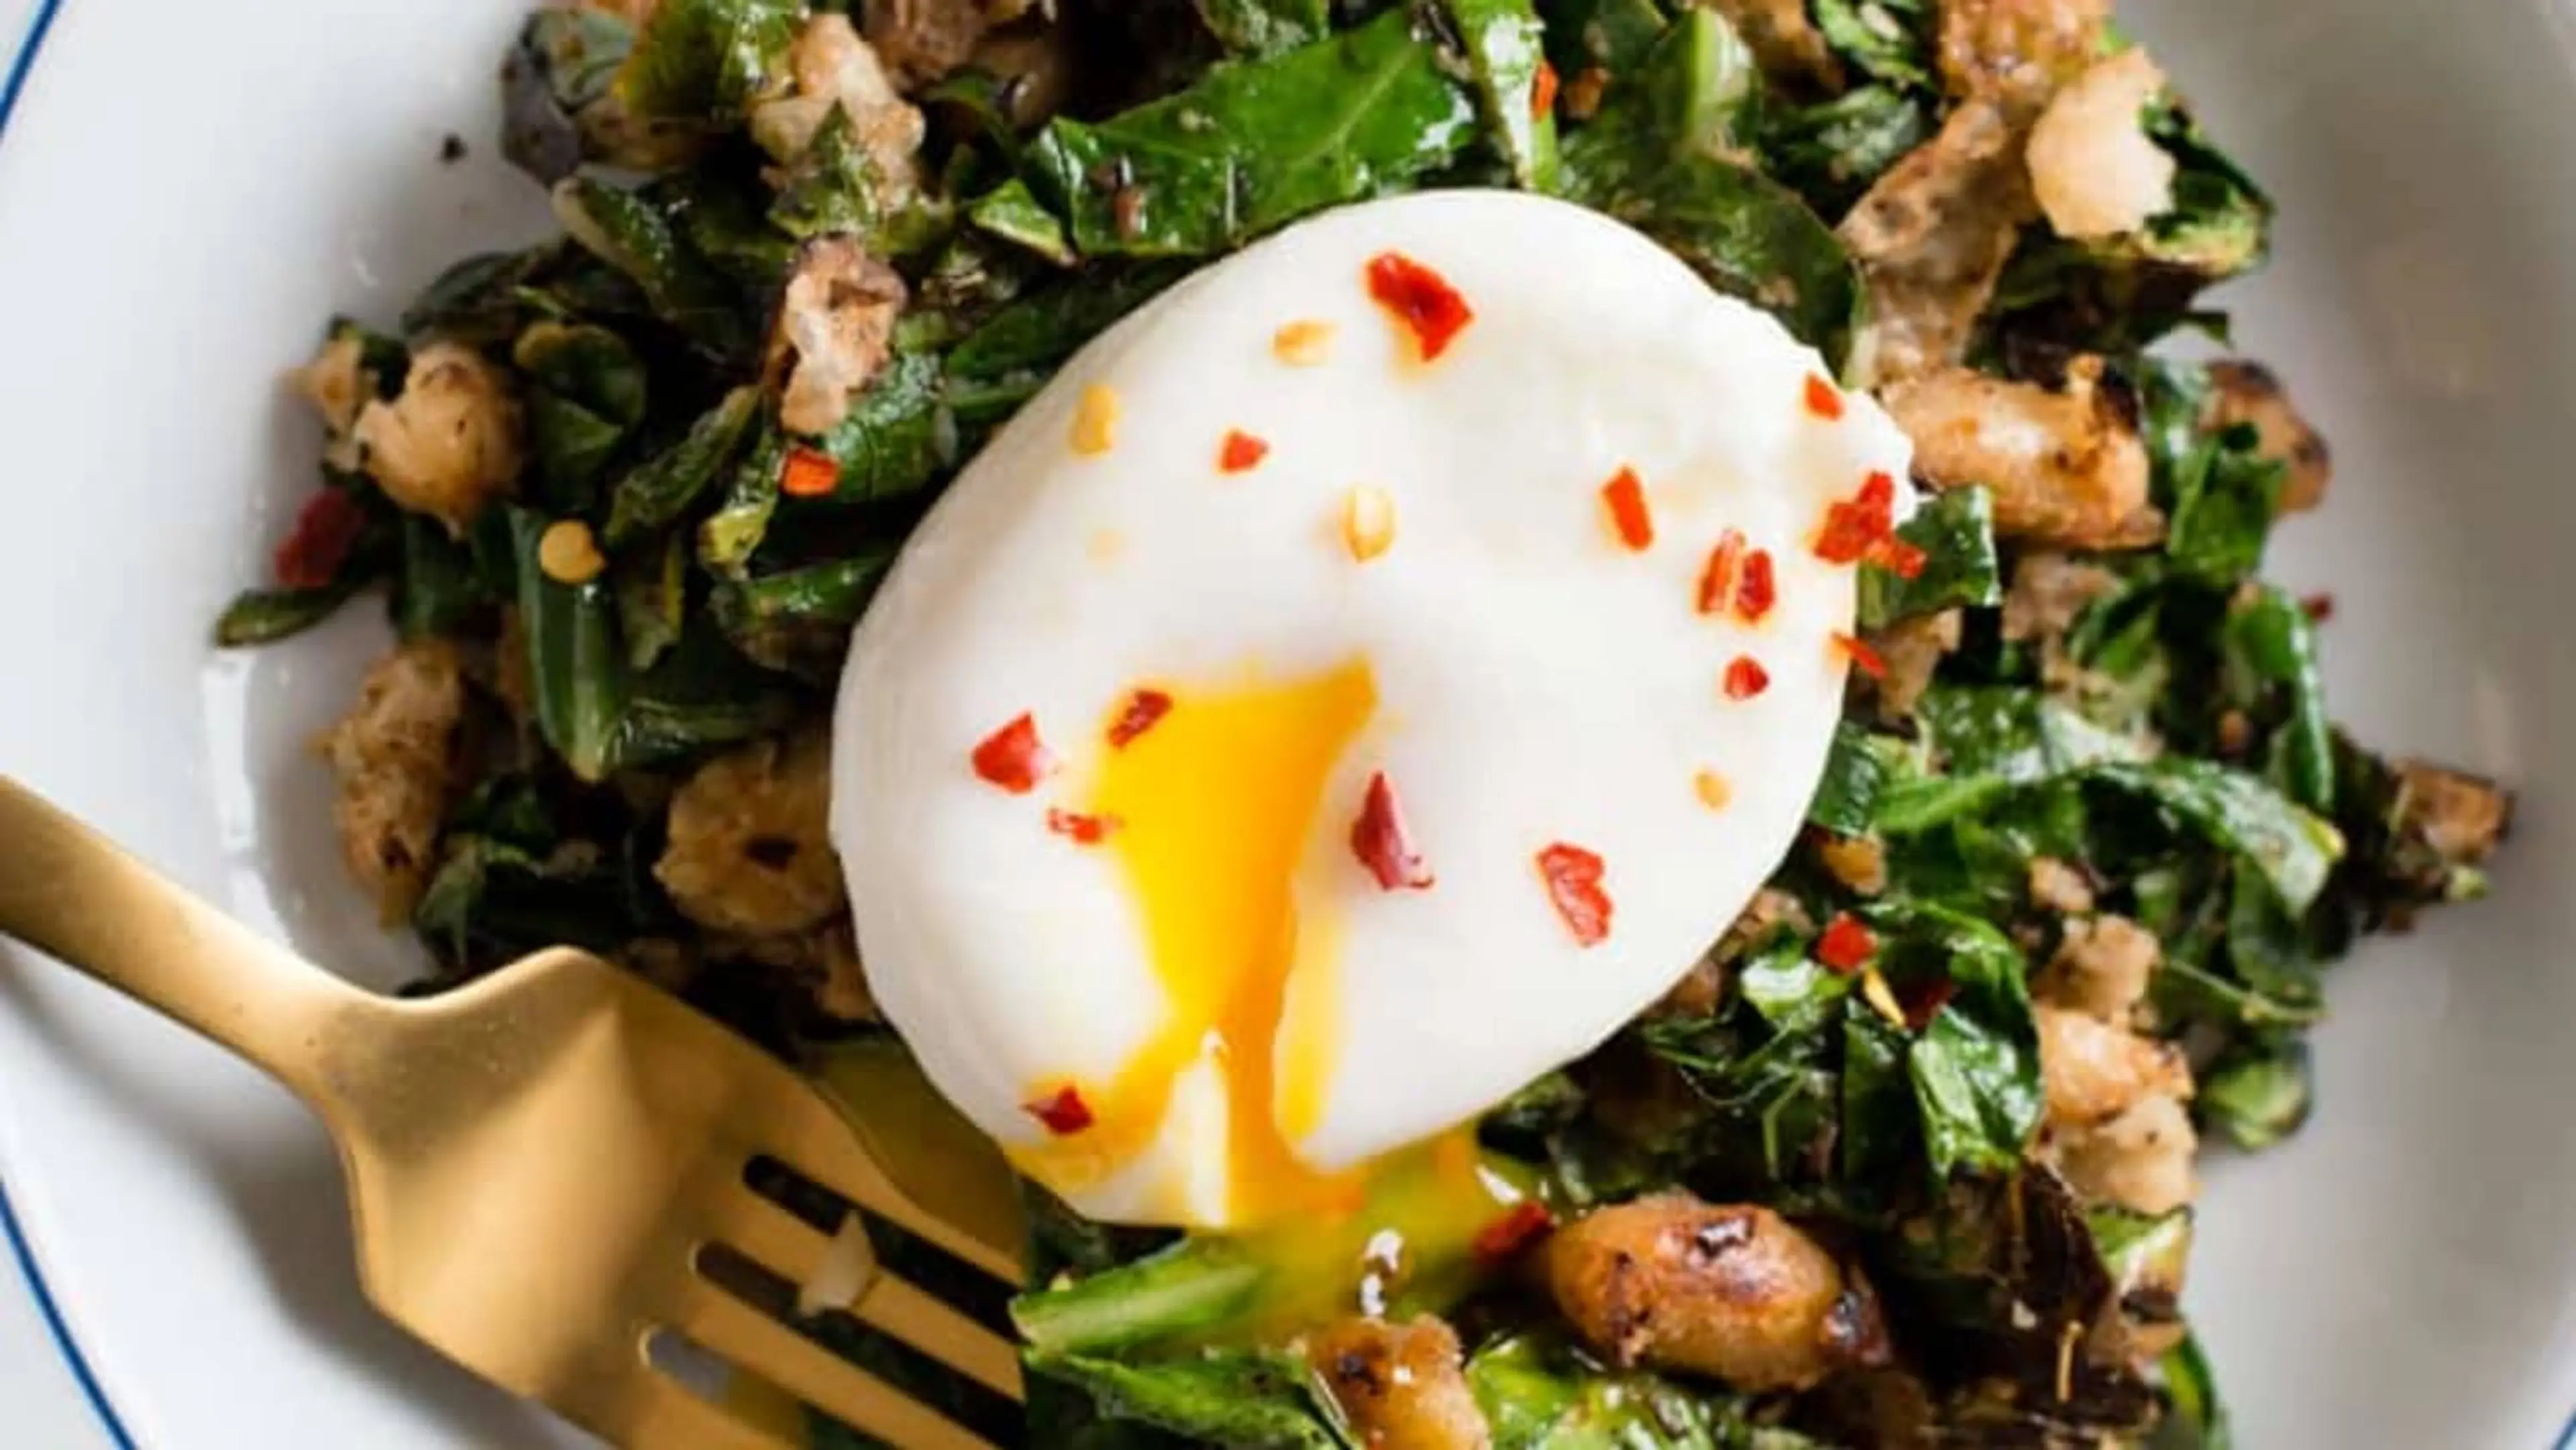 Recipe: Crispy White Beans with Greens and Poached Egg